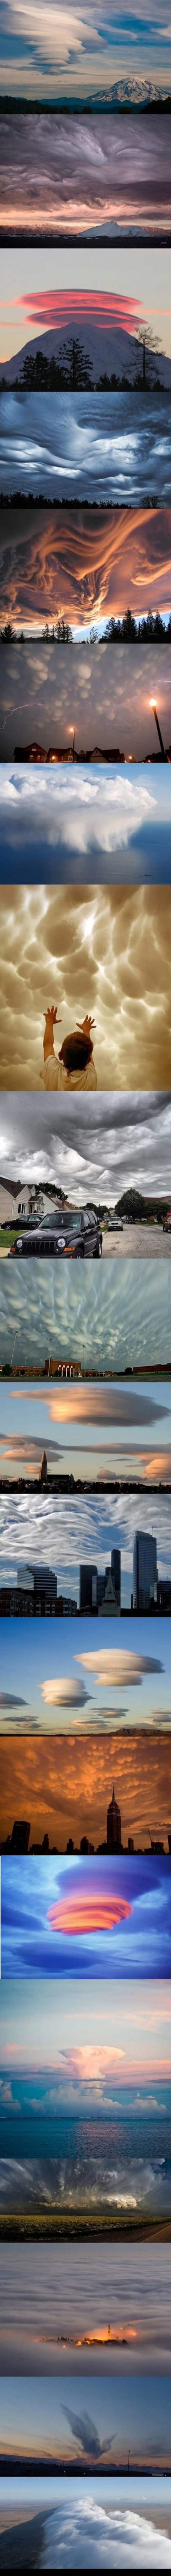 Some Of The Most Spectacular Cloud Formations